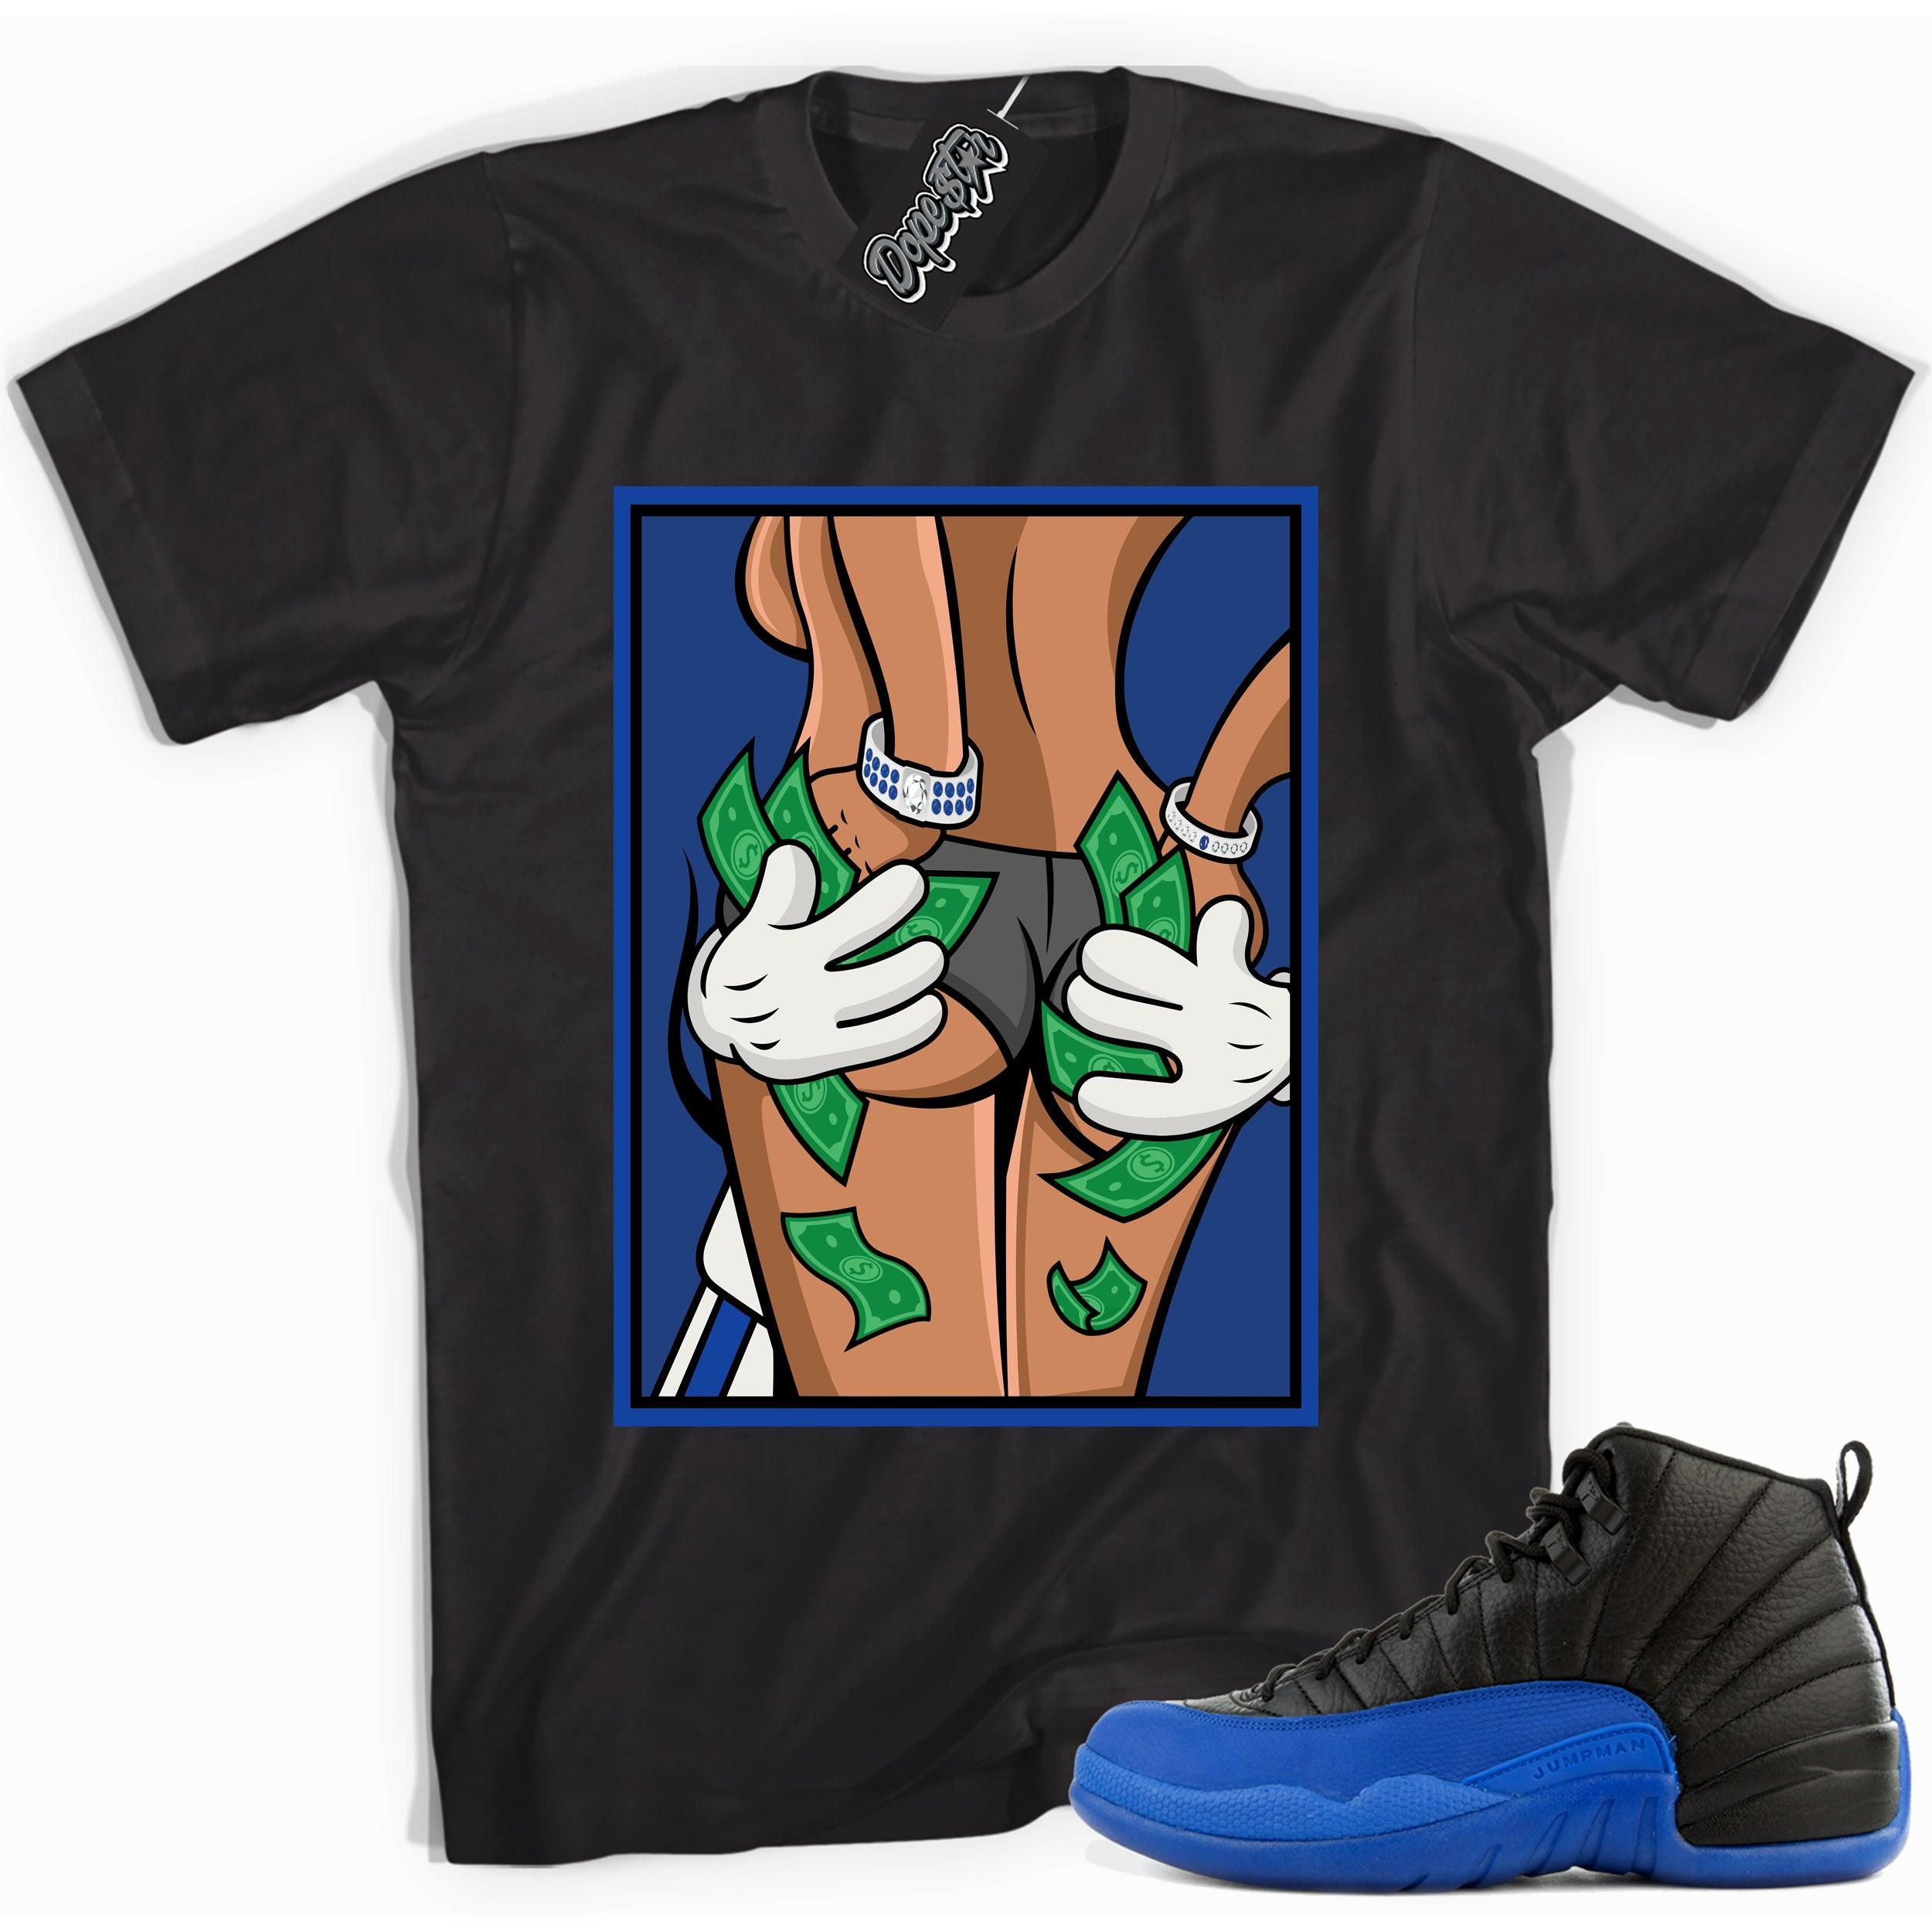 Cool black graphic tee with 'hands full' print, that perfectly matches  Air Jordan 12 Retro Black Game Royal sneakers.